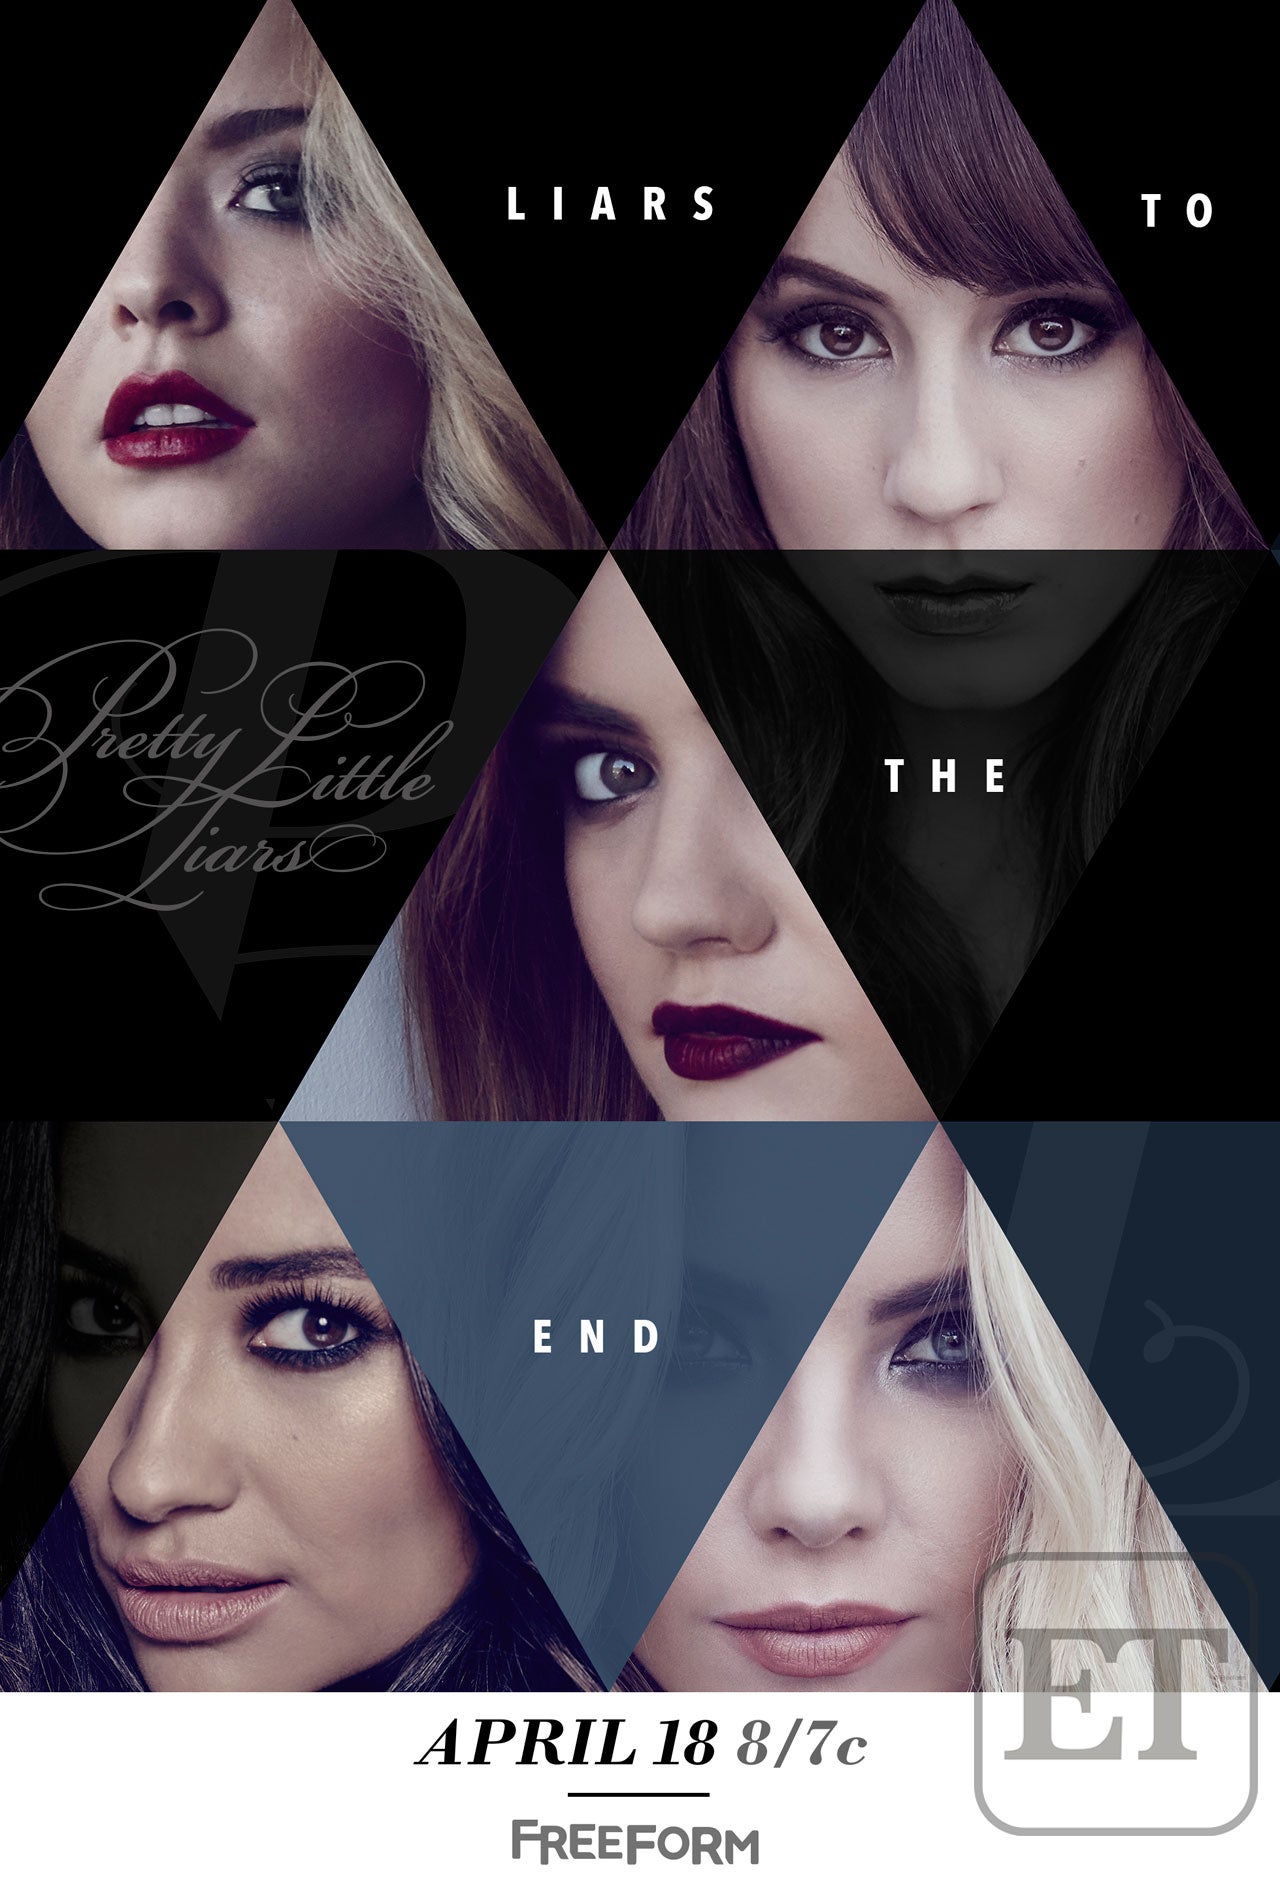 EXCLUSIVE The 'Pretty Little Liars' Will Give You Chills in Seductive